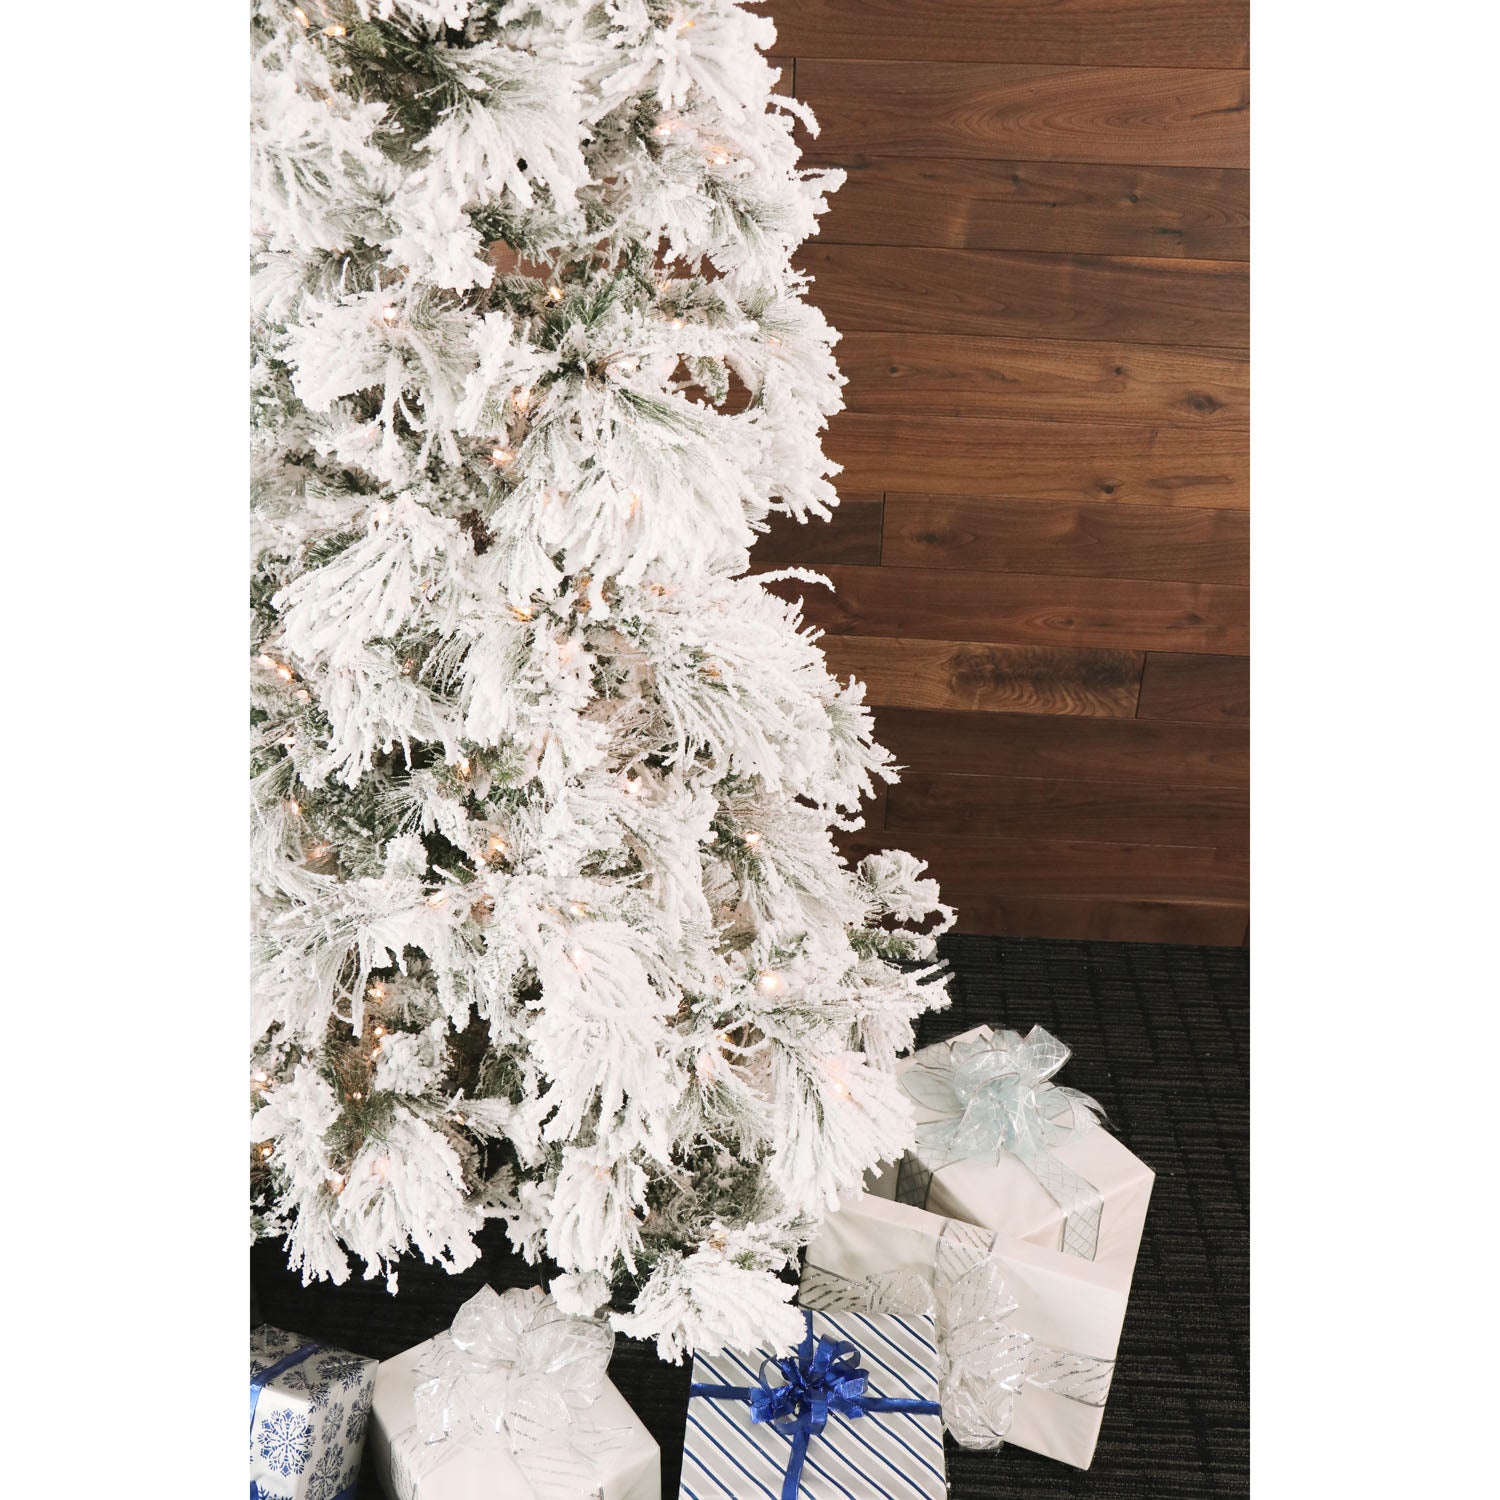 Fraser Hill Farm -  7.5-Ft. Flocked Snowy Pine Christmas Tree with Warm White LED Lighting